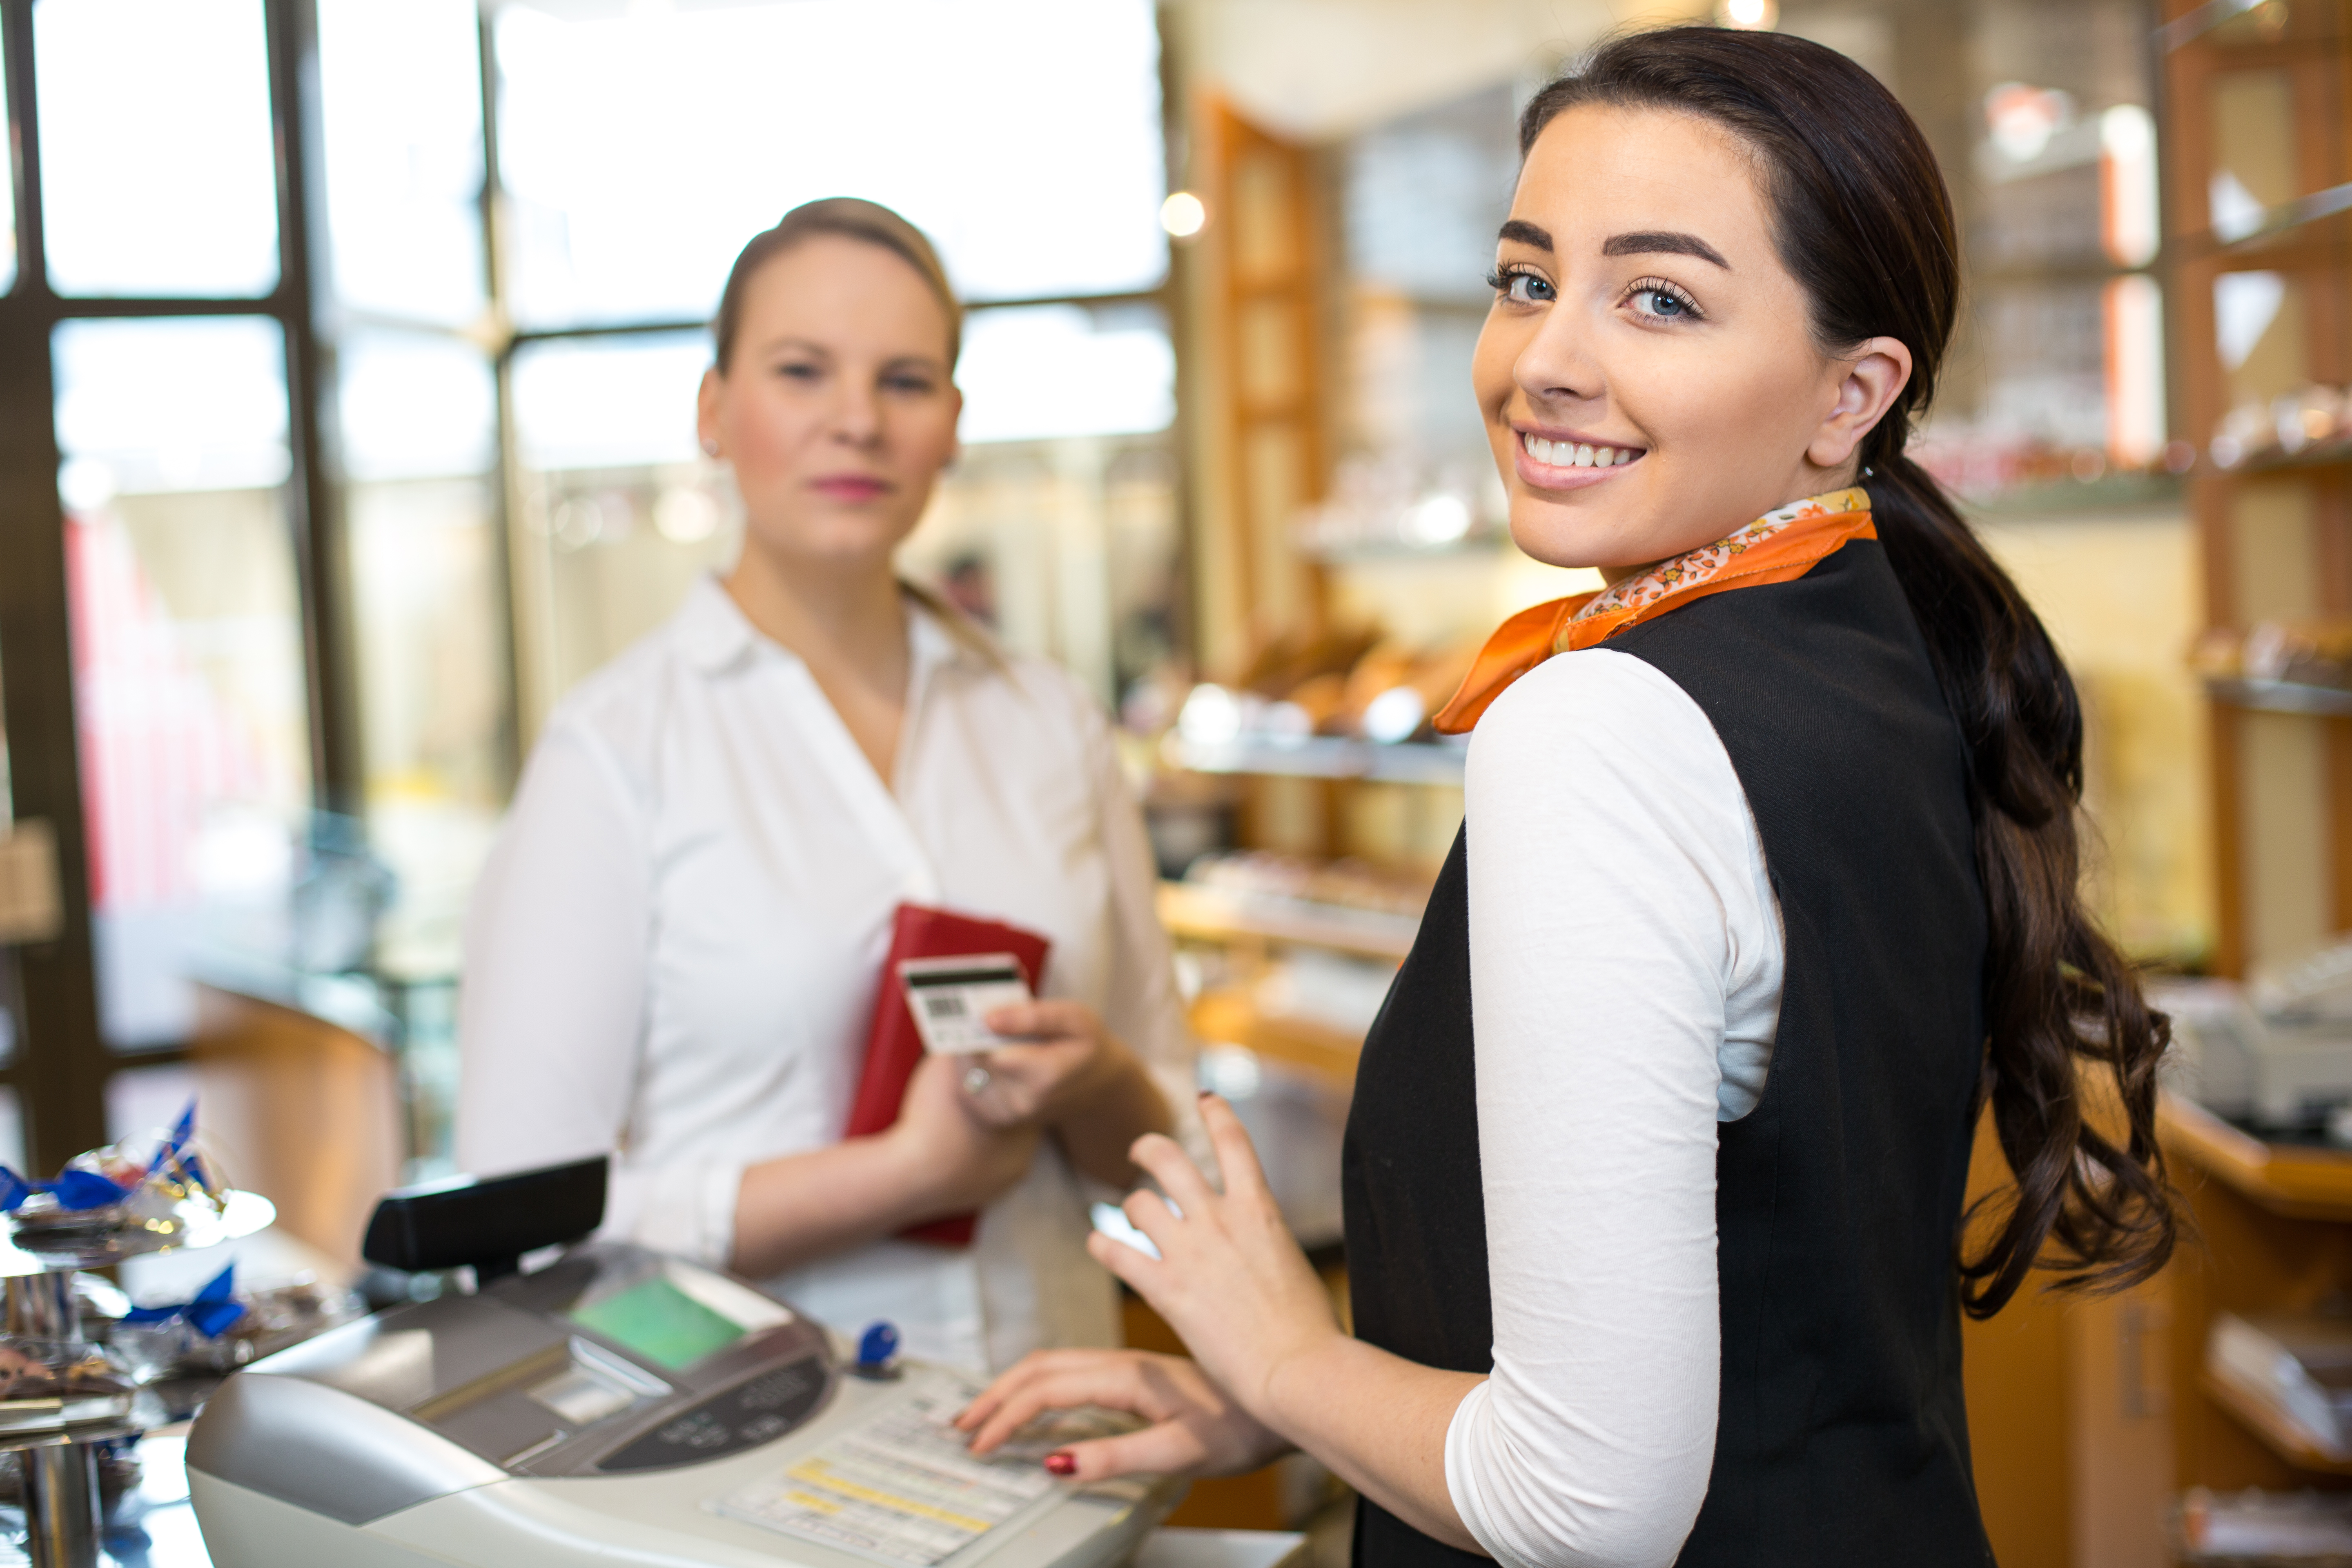 young lady holding a credit card at a cash register and smiling while another lady who is out of focus stands on the other side of a counter